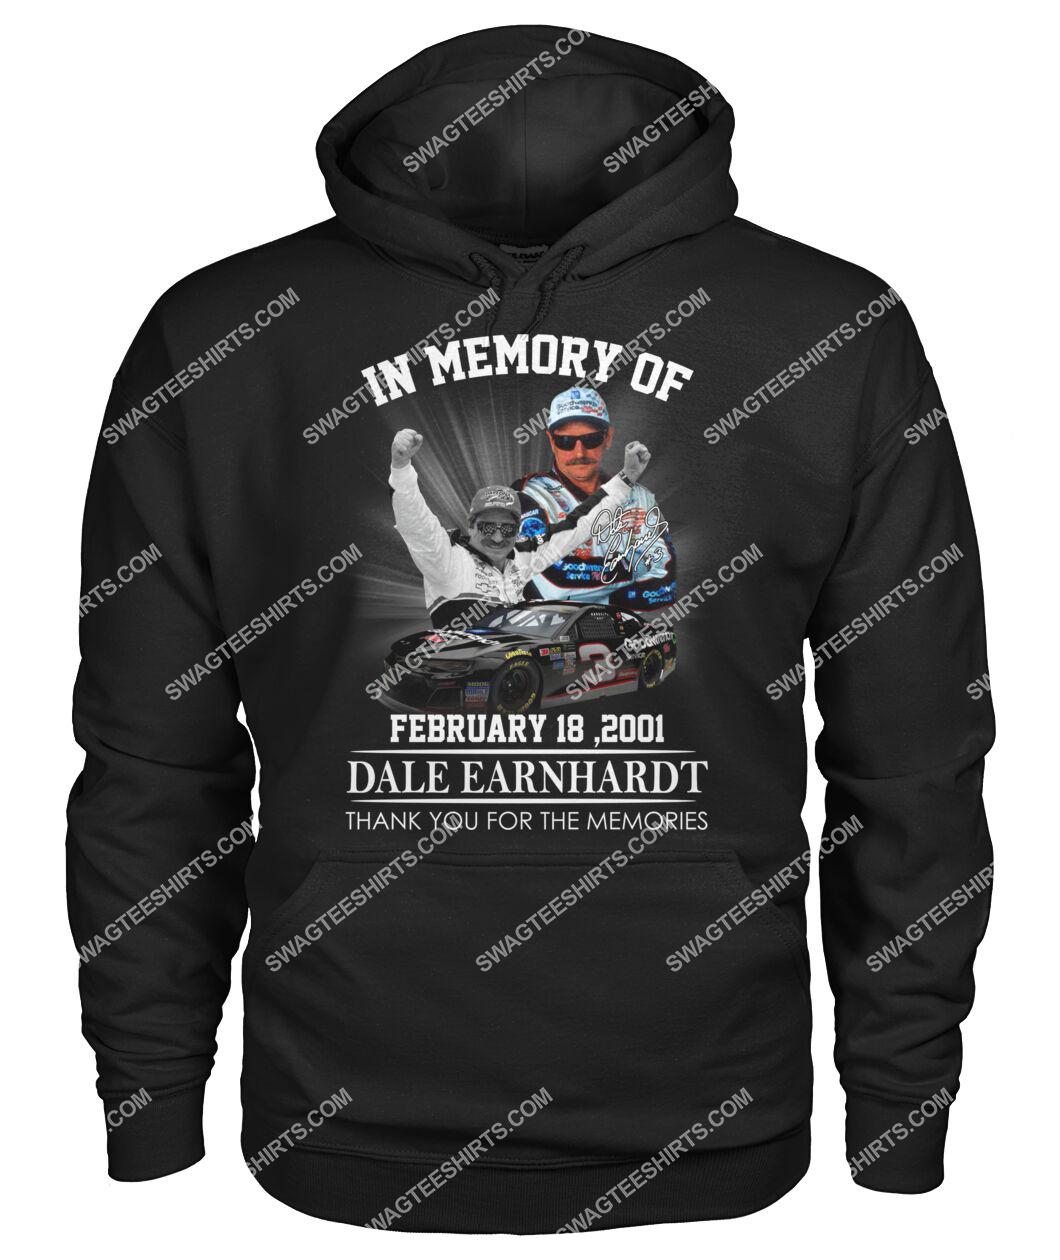 in memory of dale earnhardt thank you for memories hoodie 1